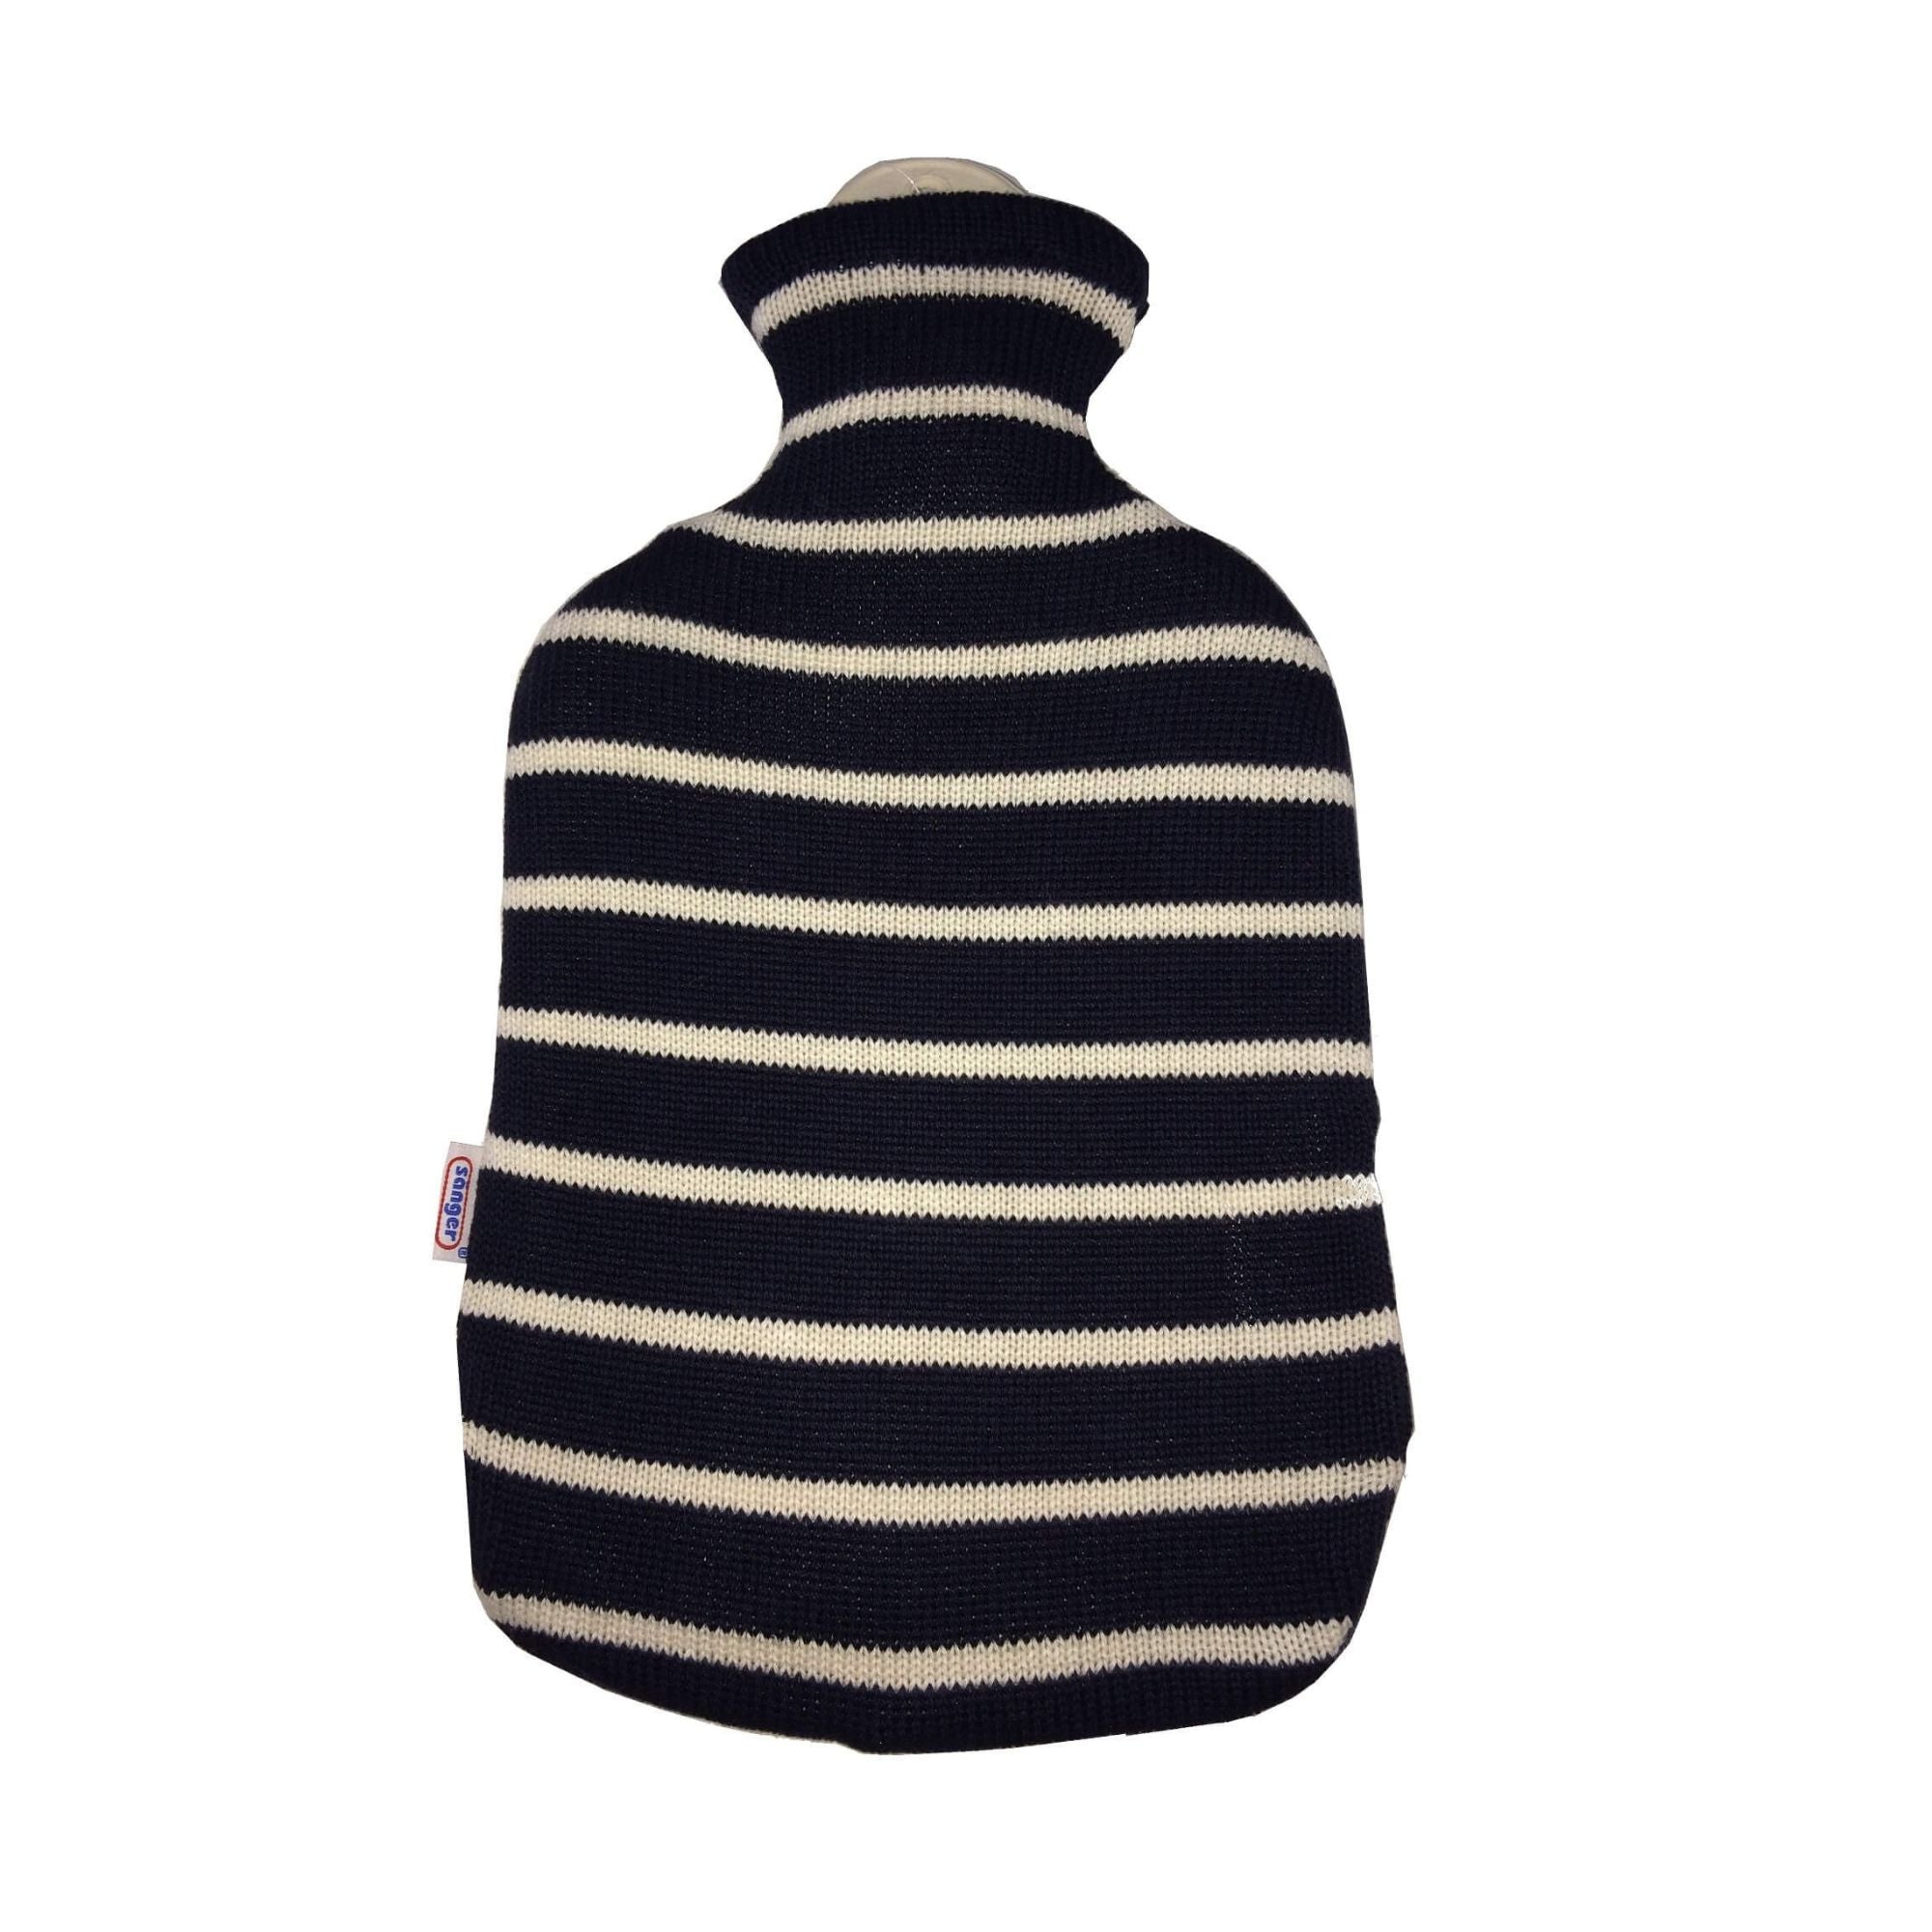 2 Litre Sanger Hot Water Bottle with Knitted Blue and White Stripe Cotton Cover